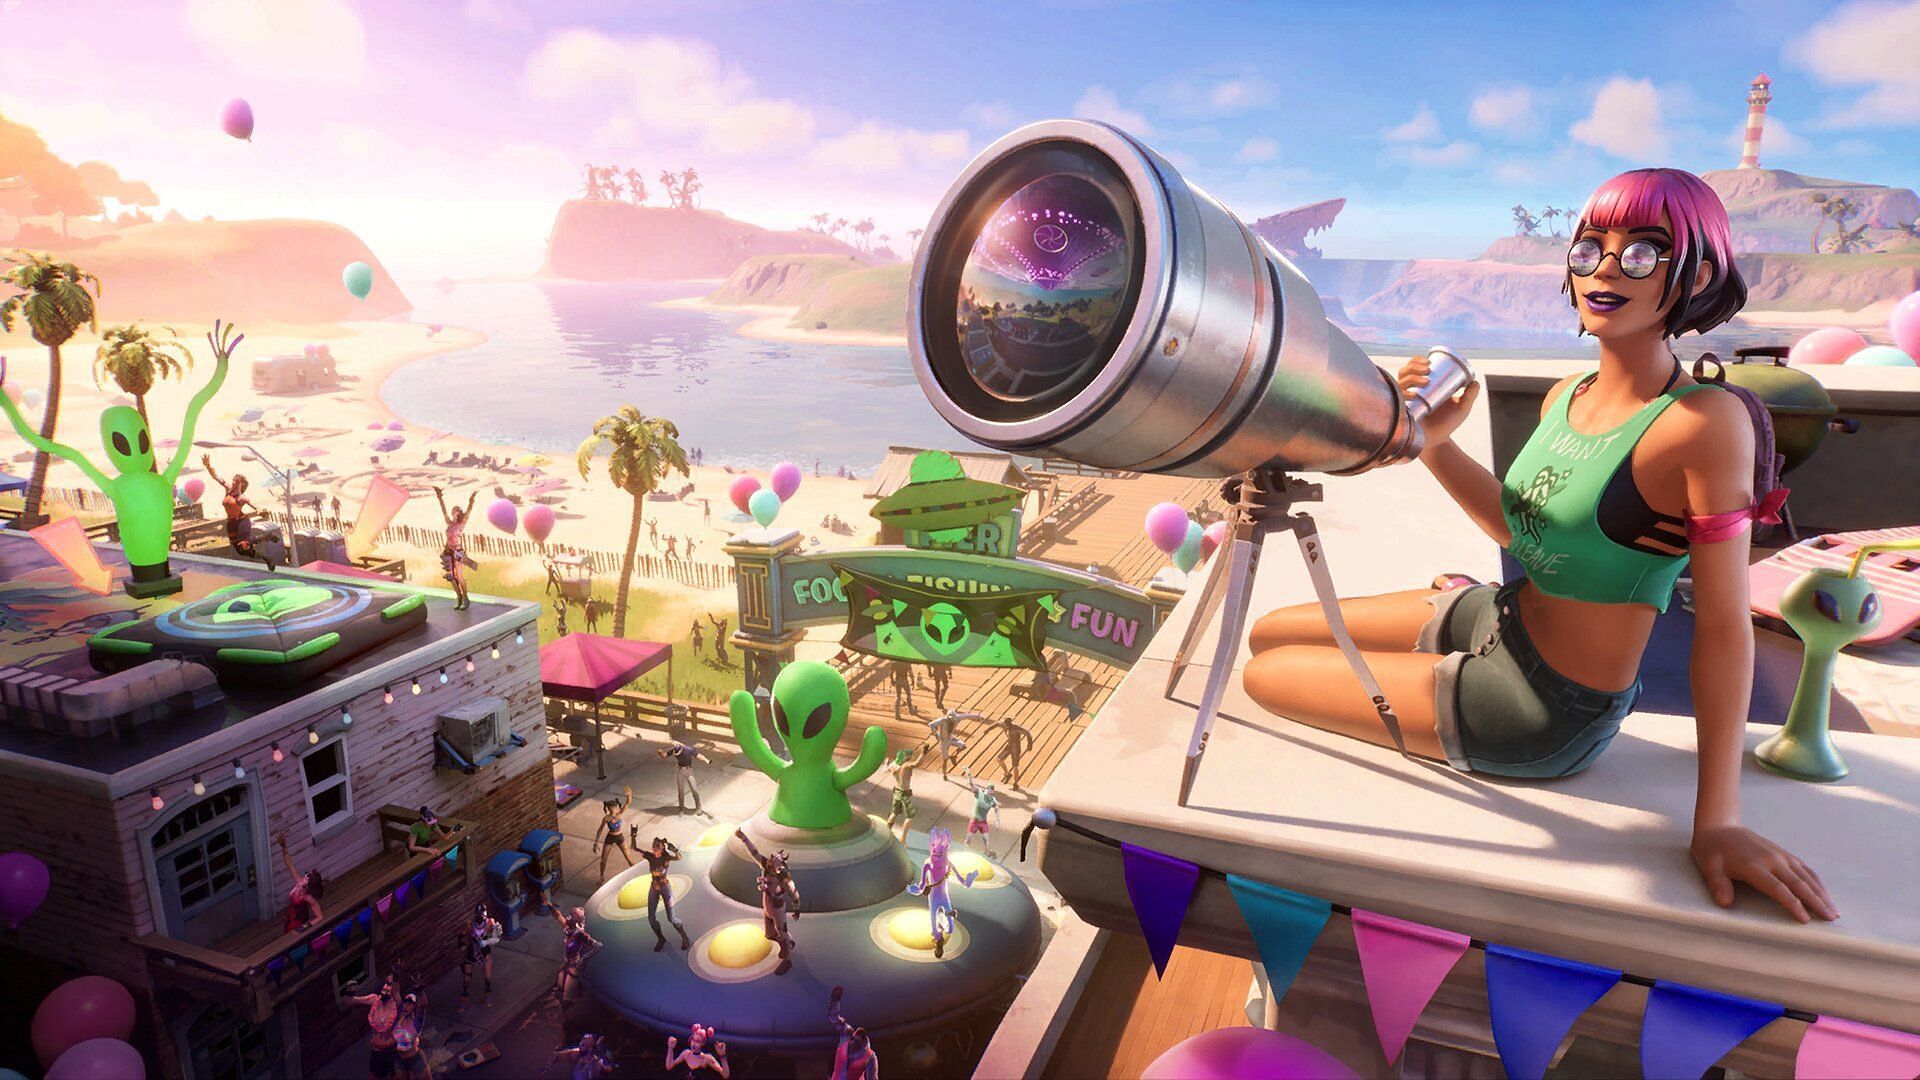 &quot;Chapter 2 Season 7 was peak so I have high hopes&quot;: Fortnite community thinks aliens might be returning to the Island soon